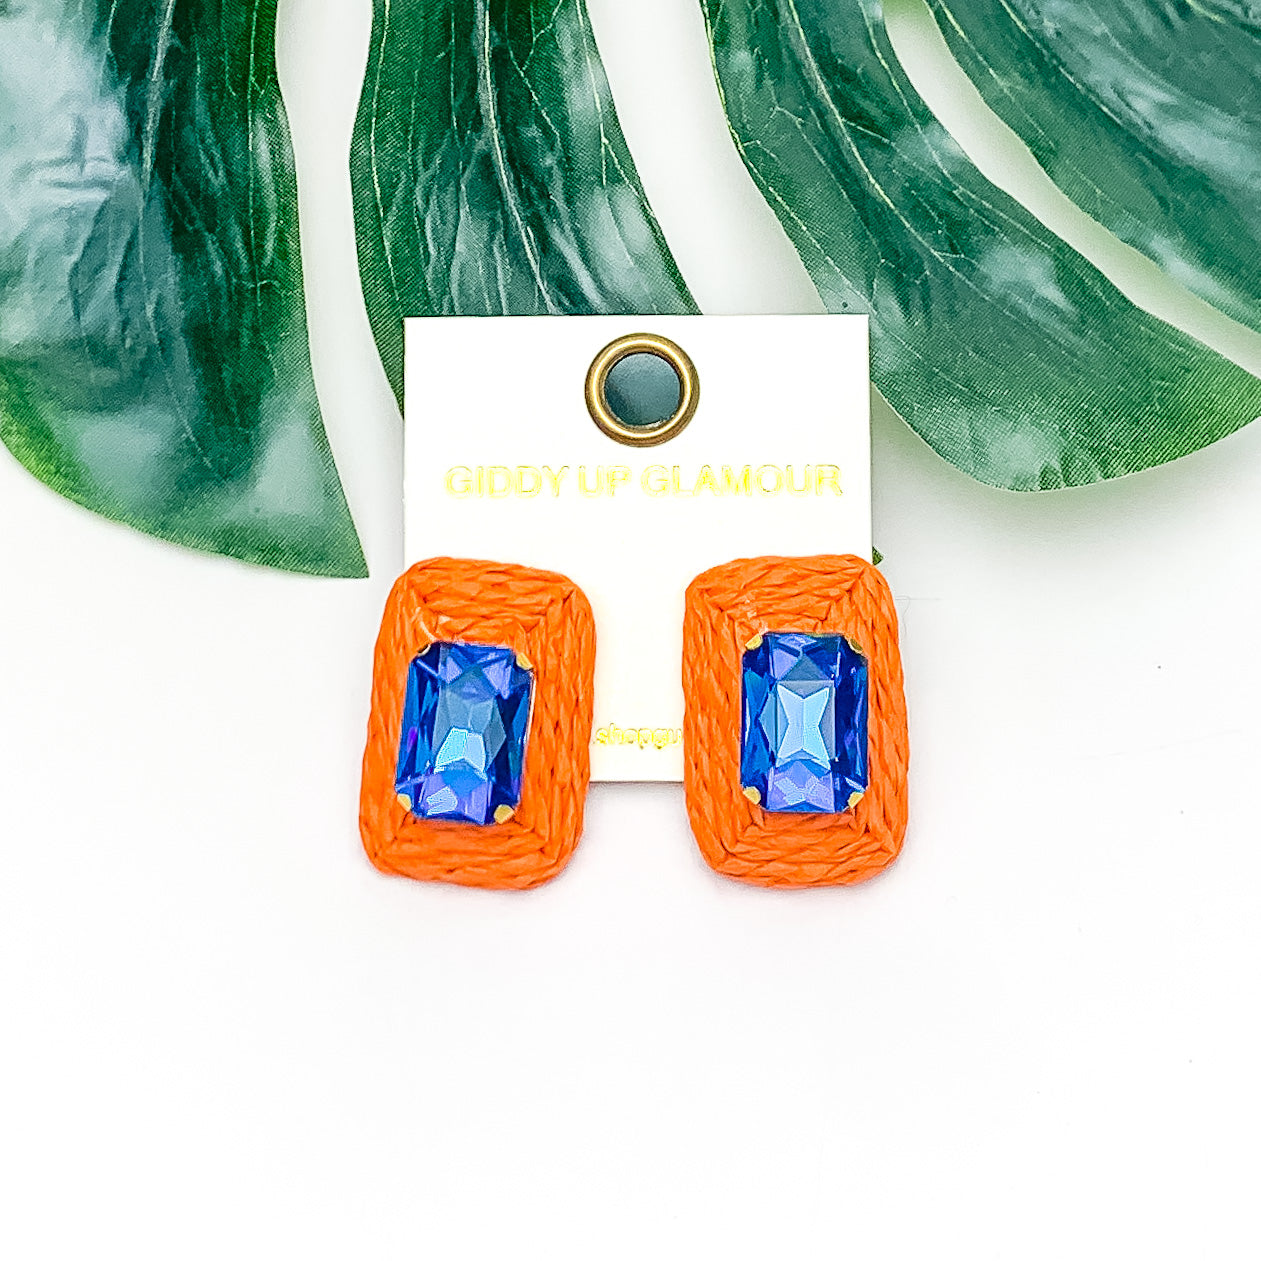 Truly Tropical Raffia Rectangle Earrings in Orange With Blue Crystal. Pictured on a white background with the earrings laying on a large leaf.